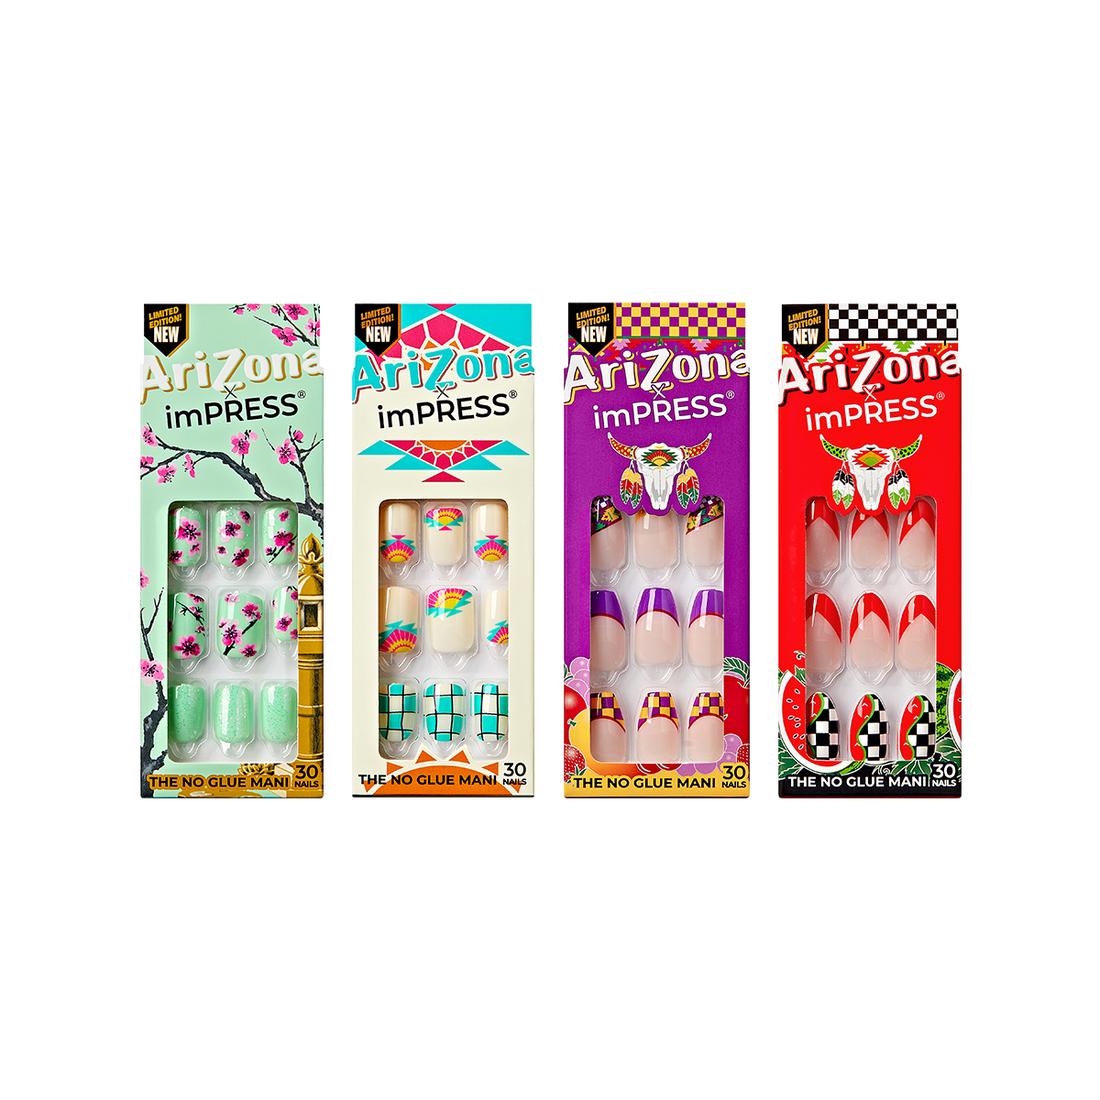 4 packs of limited edition imPRESS artificial nails in limited edition designs in collaboration with Arizona Tea brand